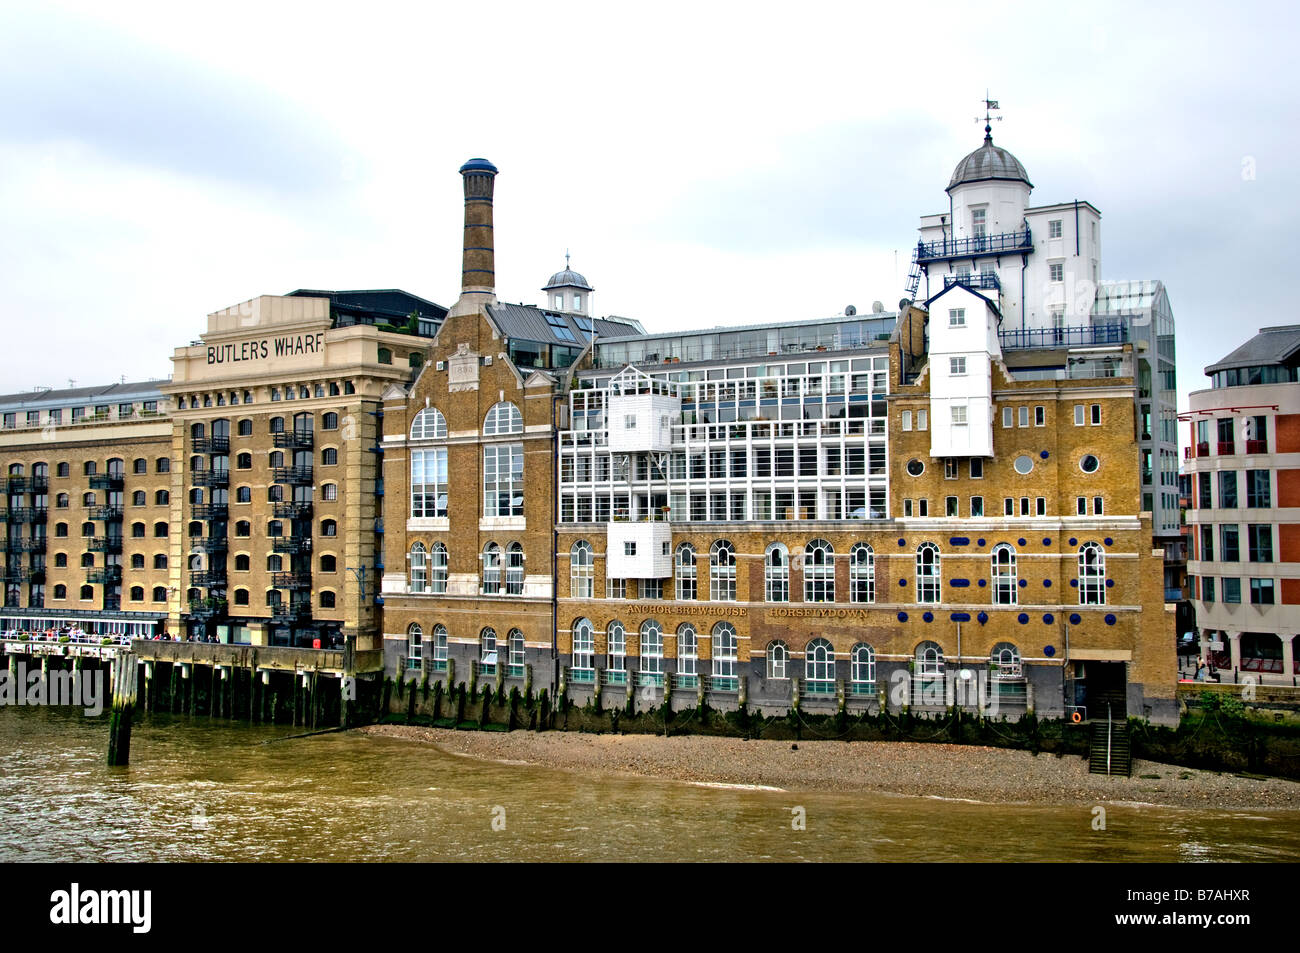 Butlers Wharf was built 1871-73 as a shipping wharf and warehouse complex Stock Photo